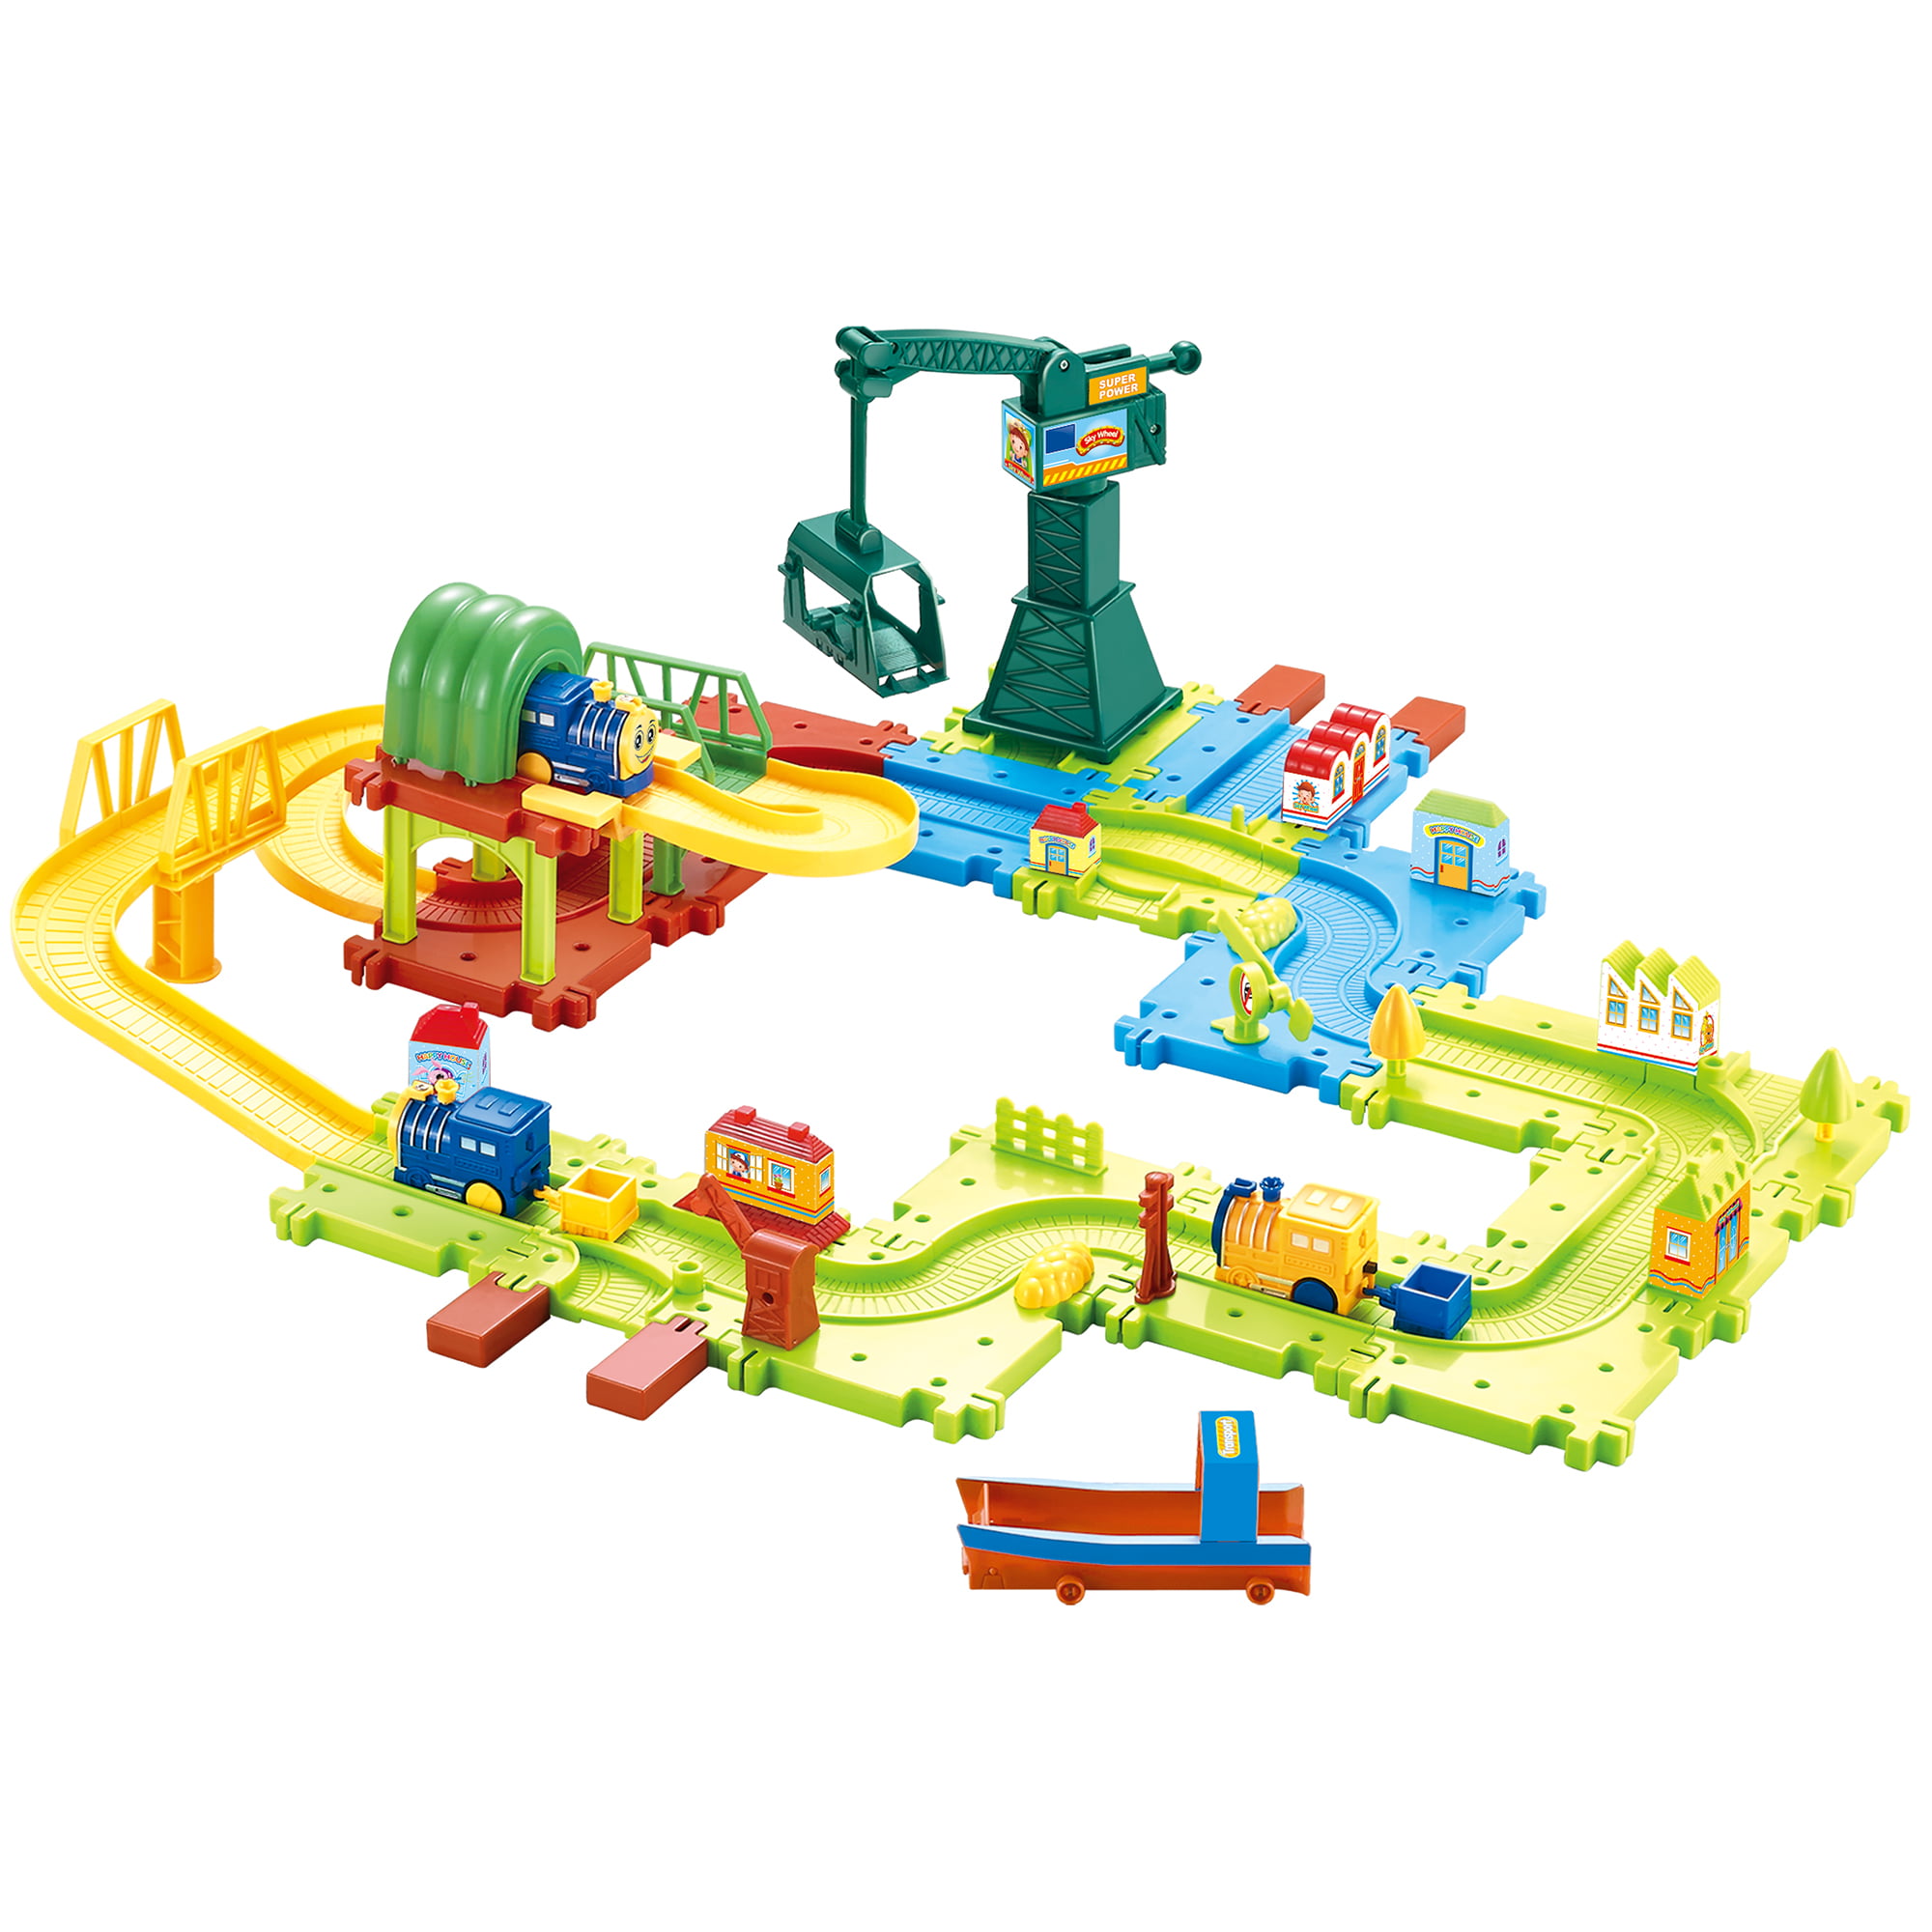 iLearn Toddler Train Set Toy w/ Lights & Sound for Boys Girls Kids Educational Preschool Learning Gift for 1 2 3 4 5 6 Year Old iPlay Baby Buildable Train Tracks Accessories w/ Building Blocks